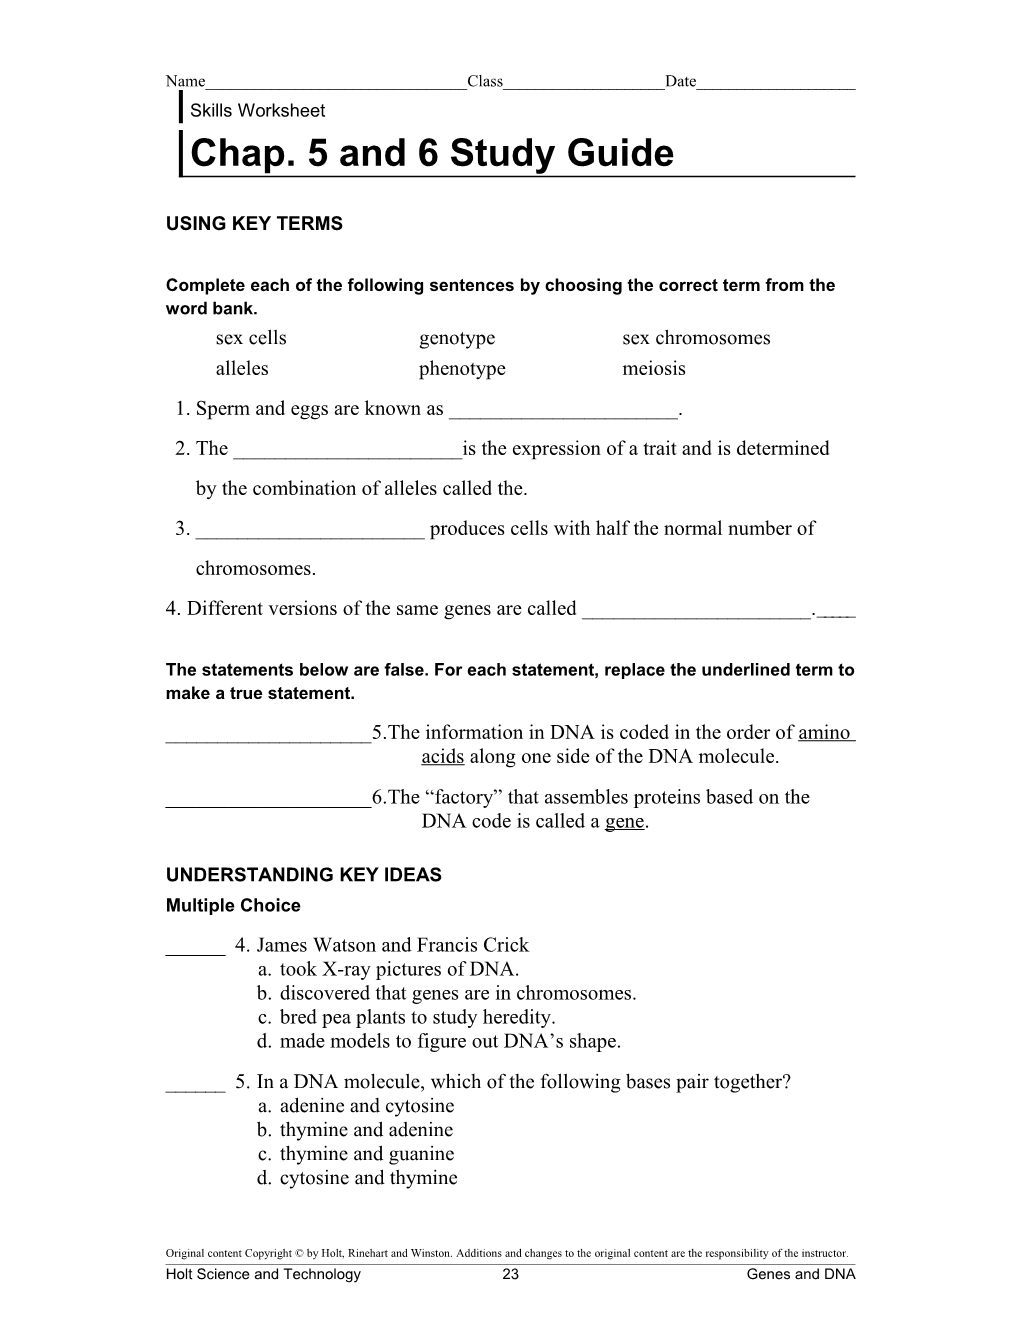 Chap. 5 and 6 Study Guide